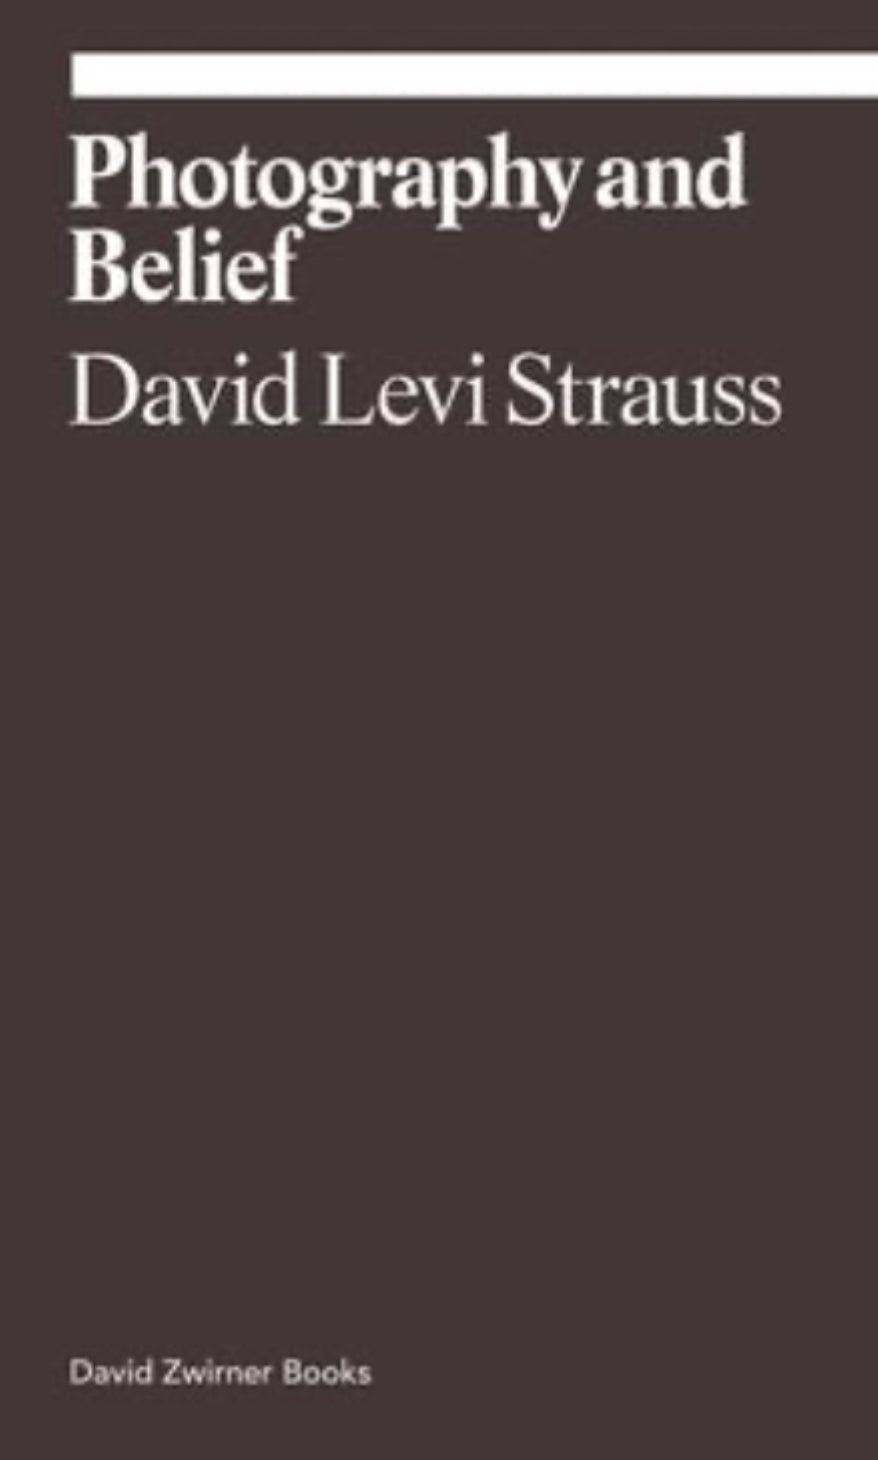 Basket Books: “Photography and Belief” by David Levi Strauss